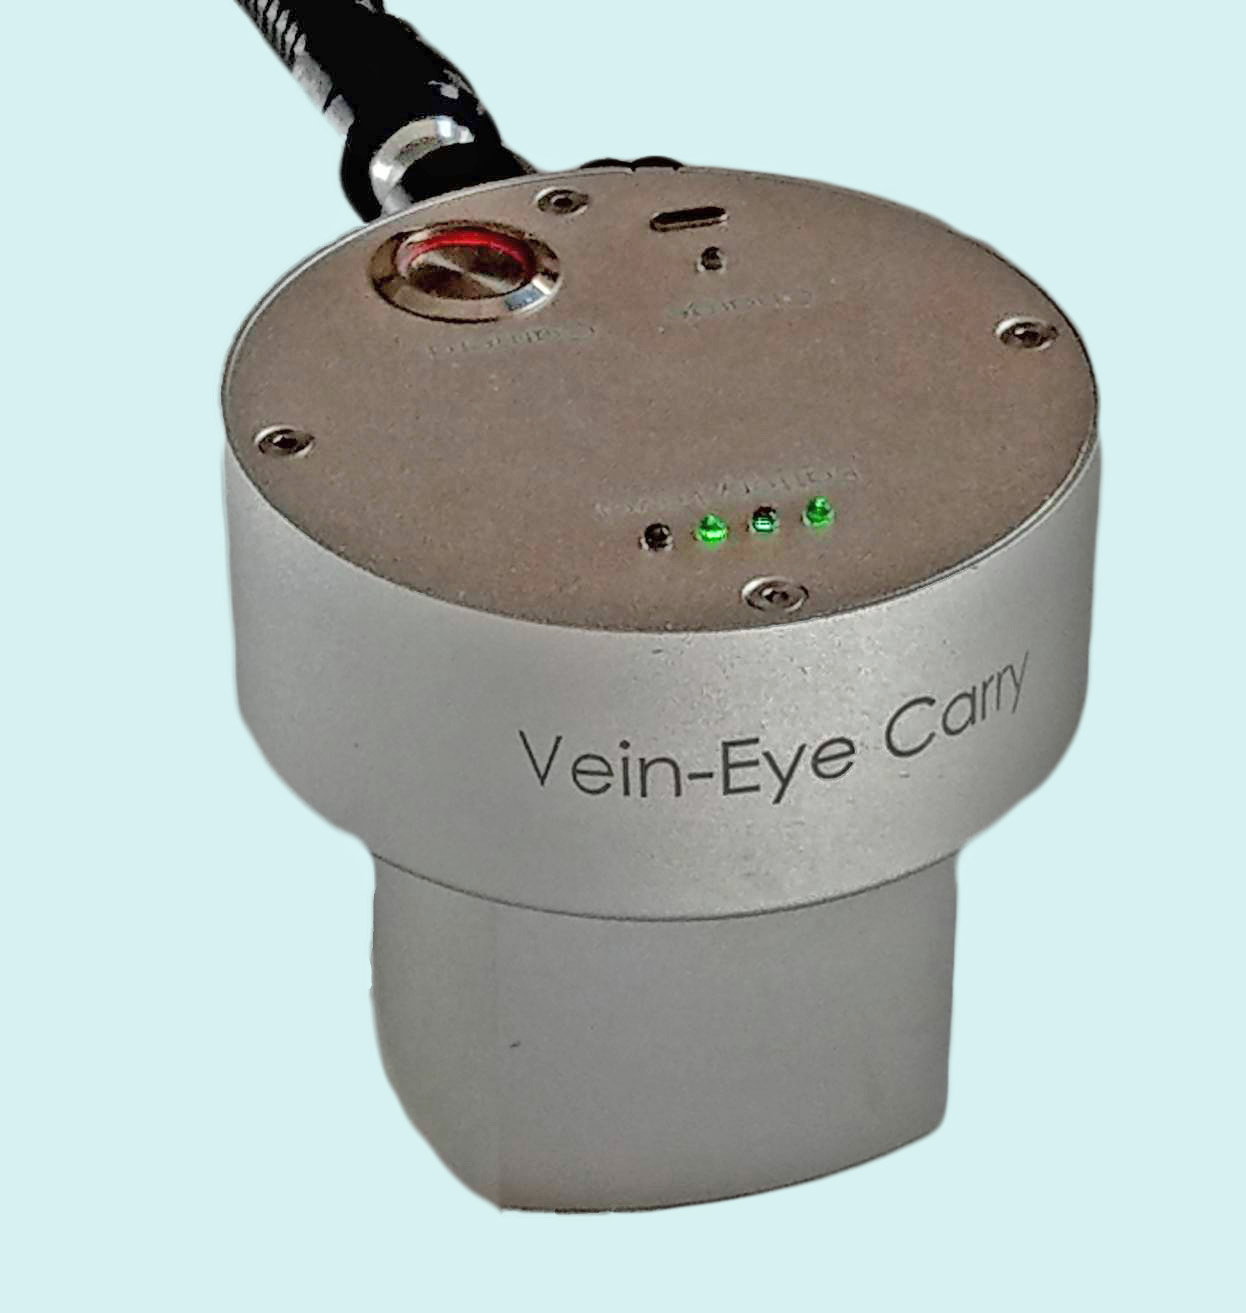 This light weight and portable camera use Al6061 the high quality material for vein access equipment, such as vein visualization Devices, vein viewing devices